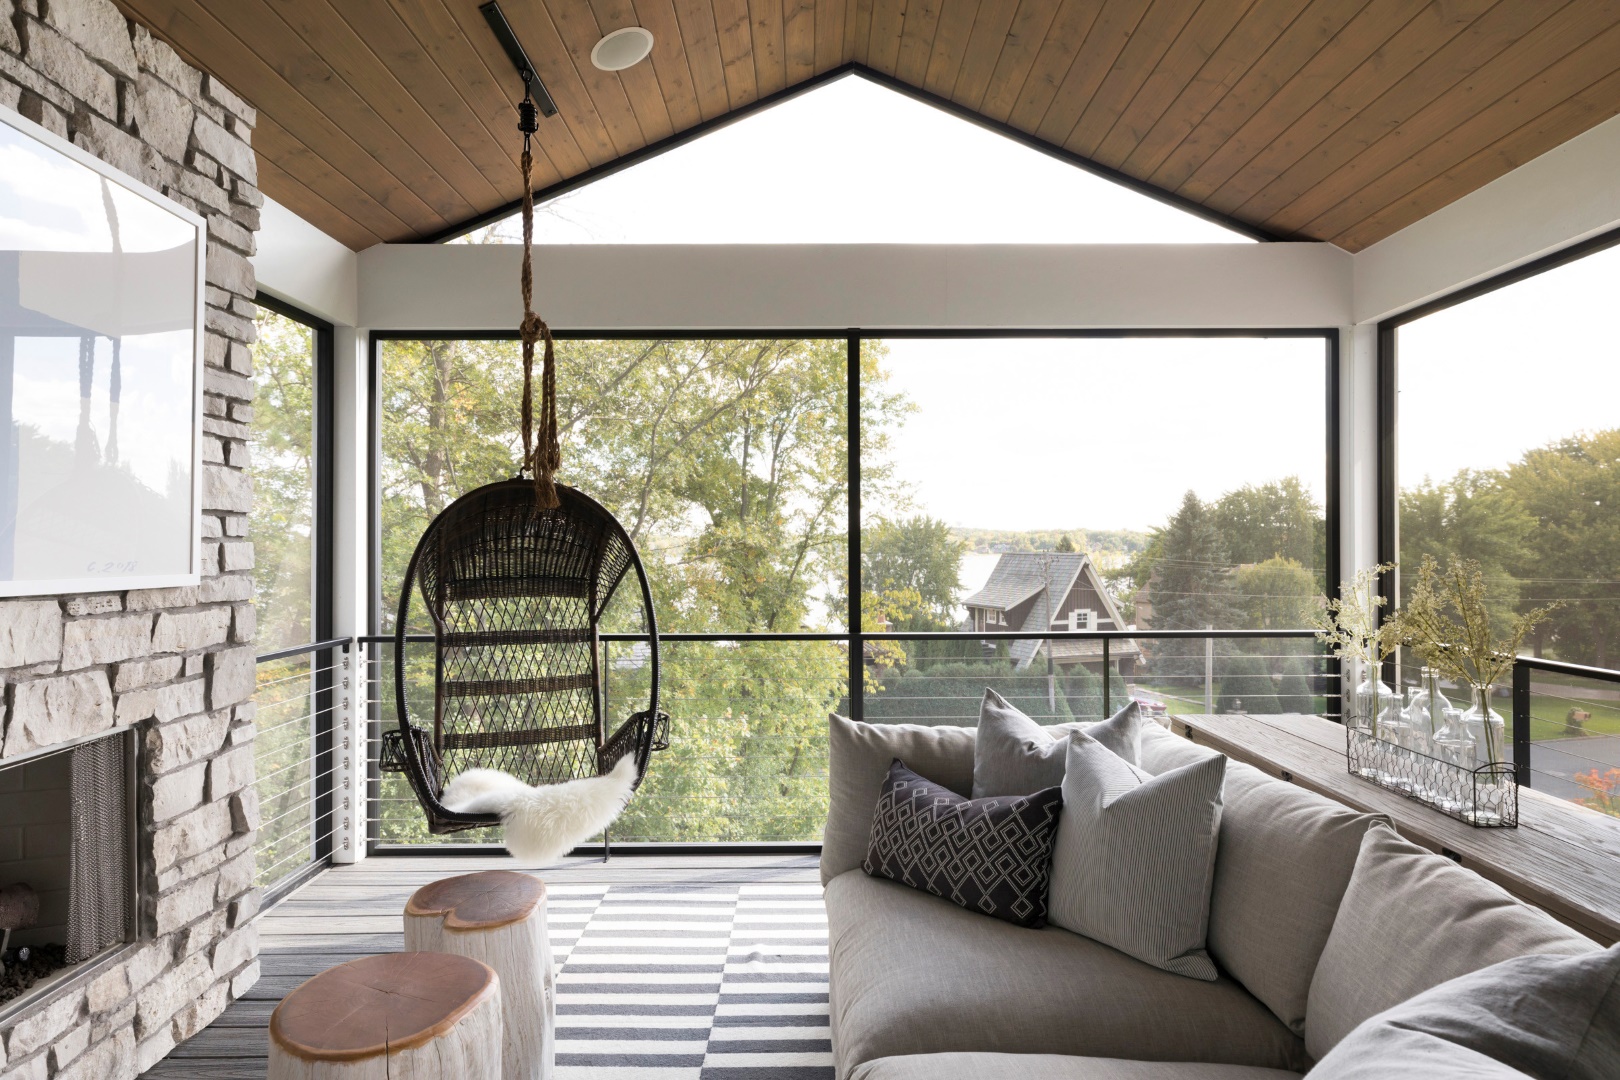 15 Stunning Transitional Sunroom Designs to Brighten Up Your Home